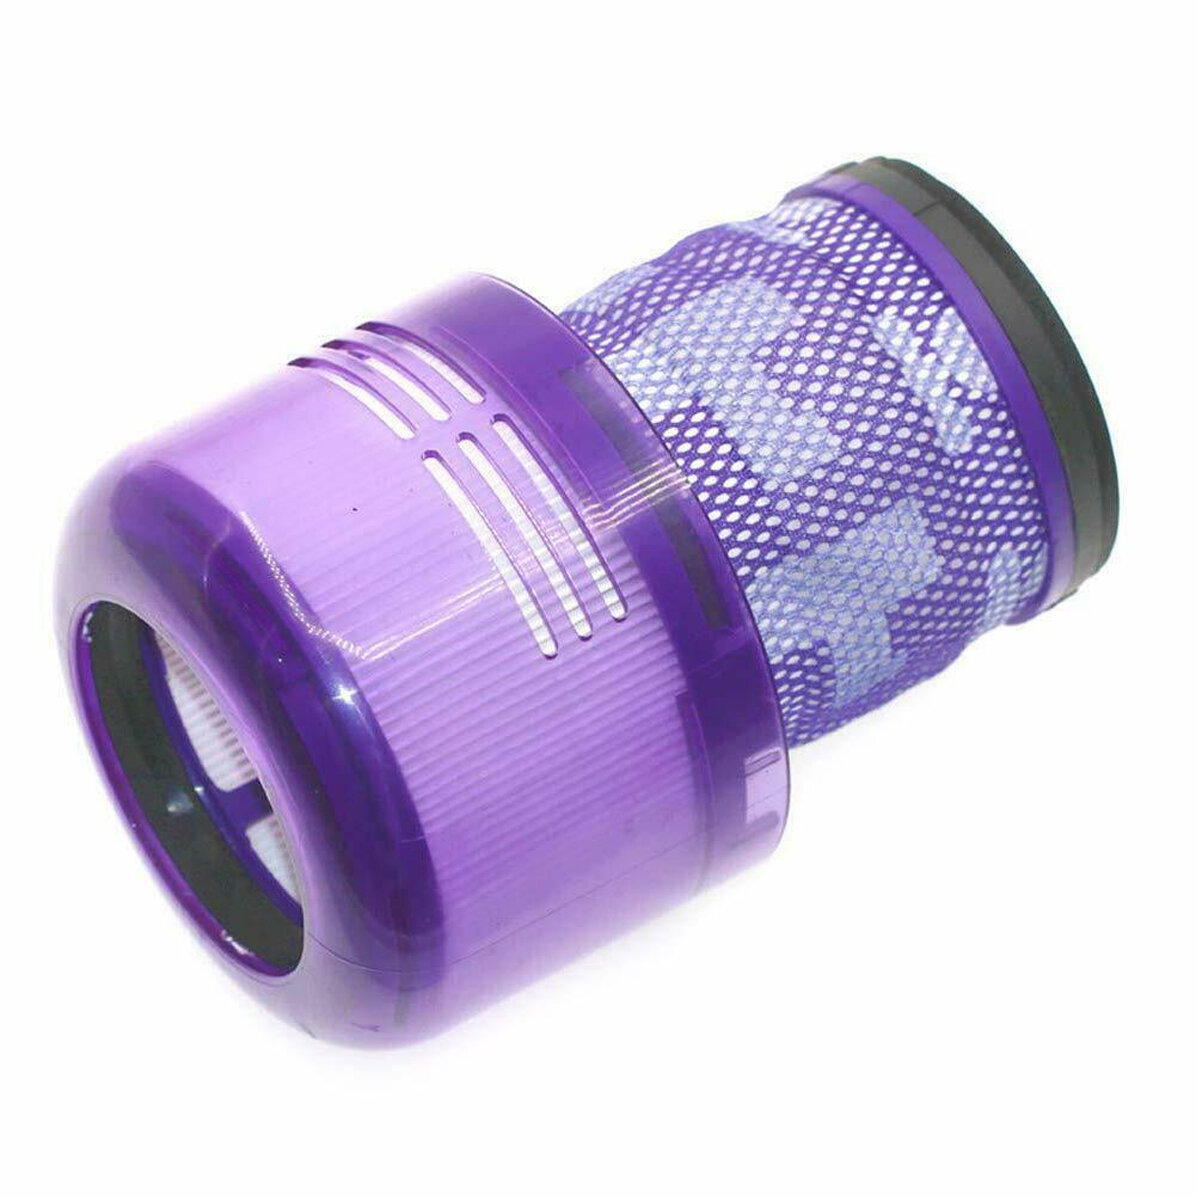 

1pcs Filter Replacements for Dyson V11 SV14 Vacuum Cleaner Parts Accessories [Non-Original]